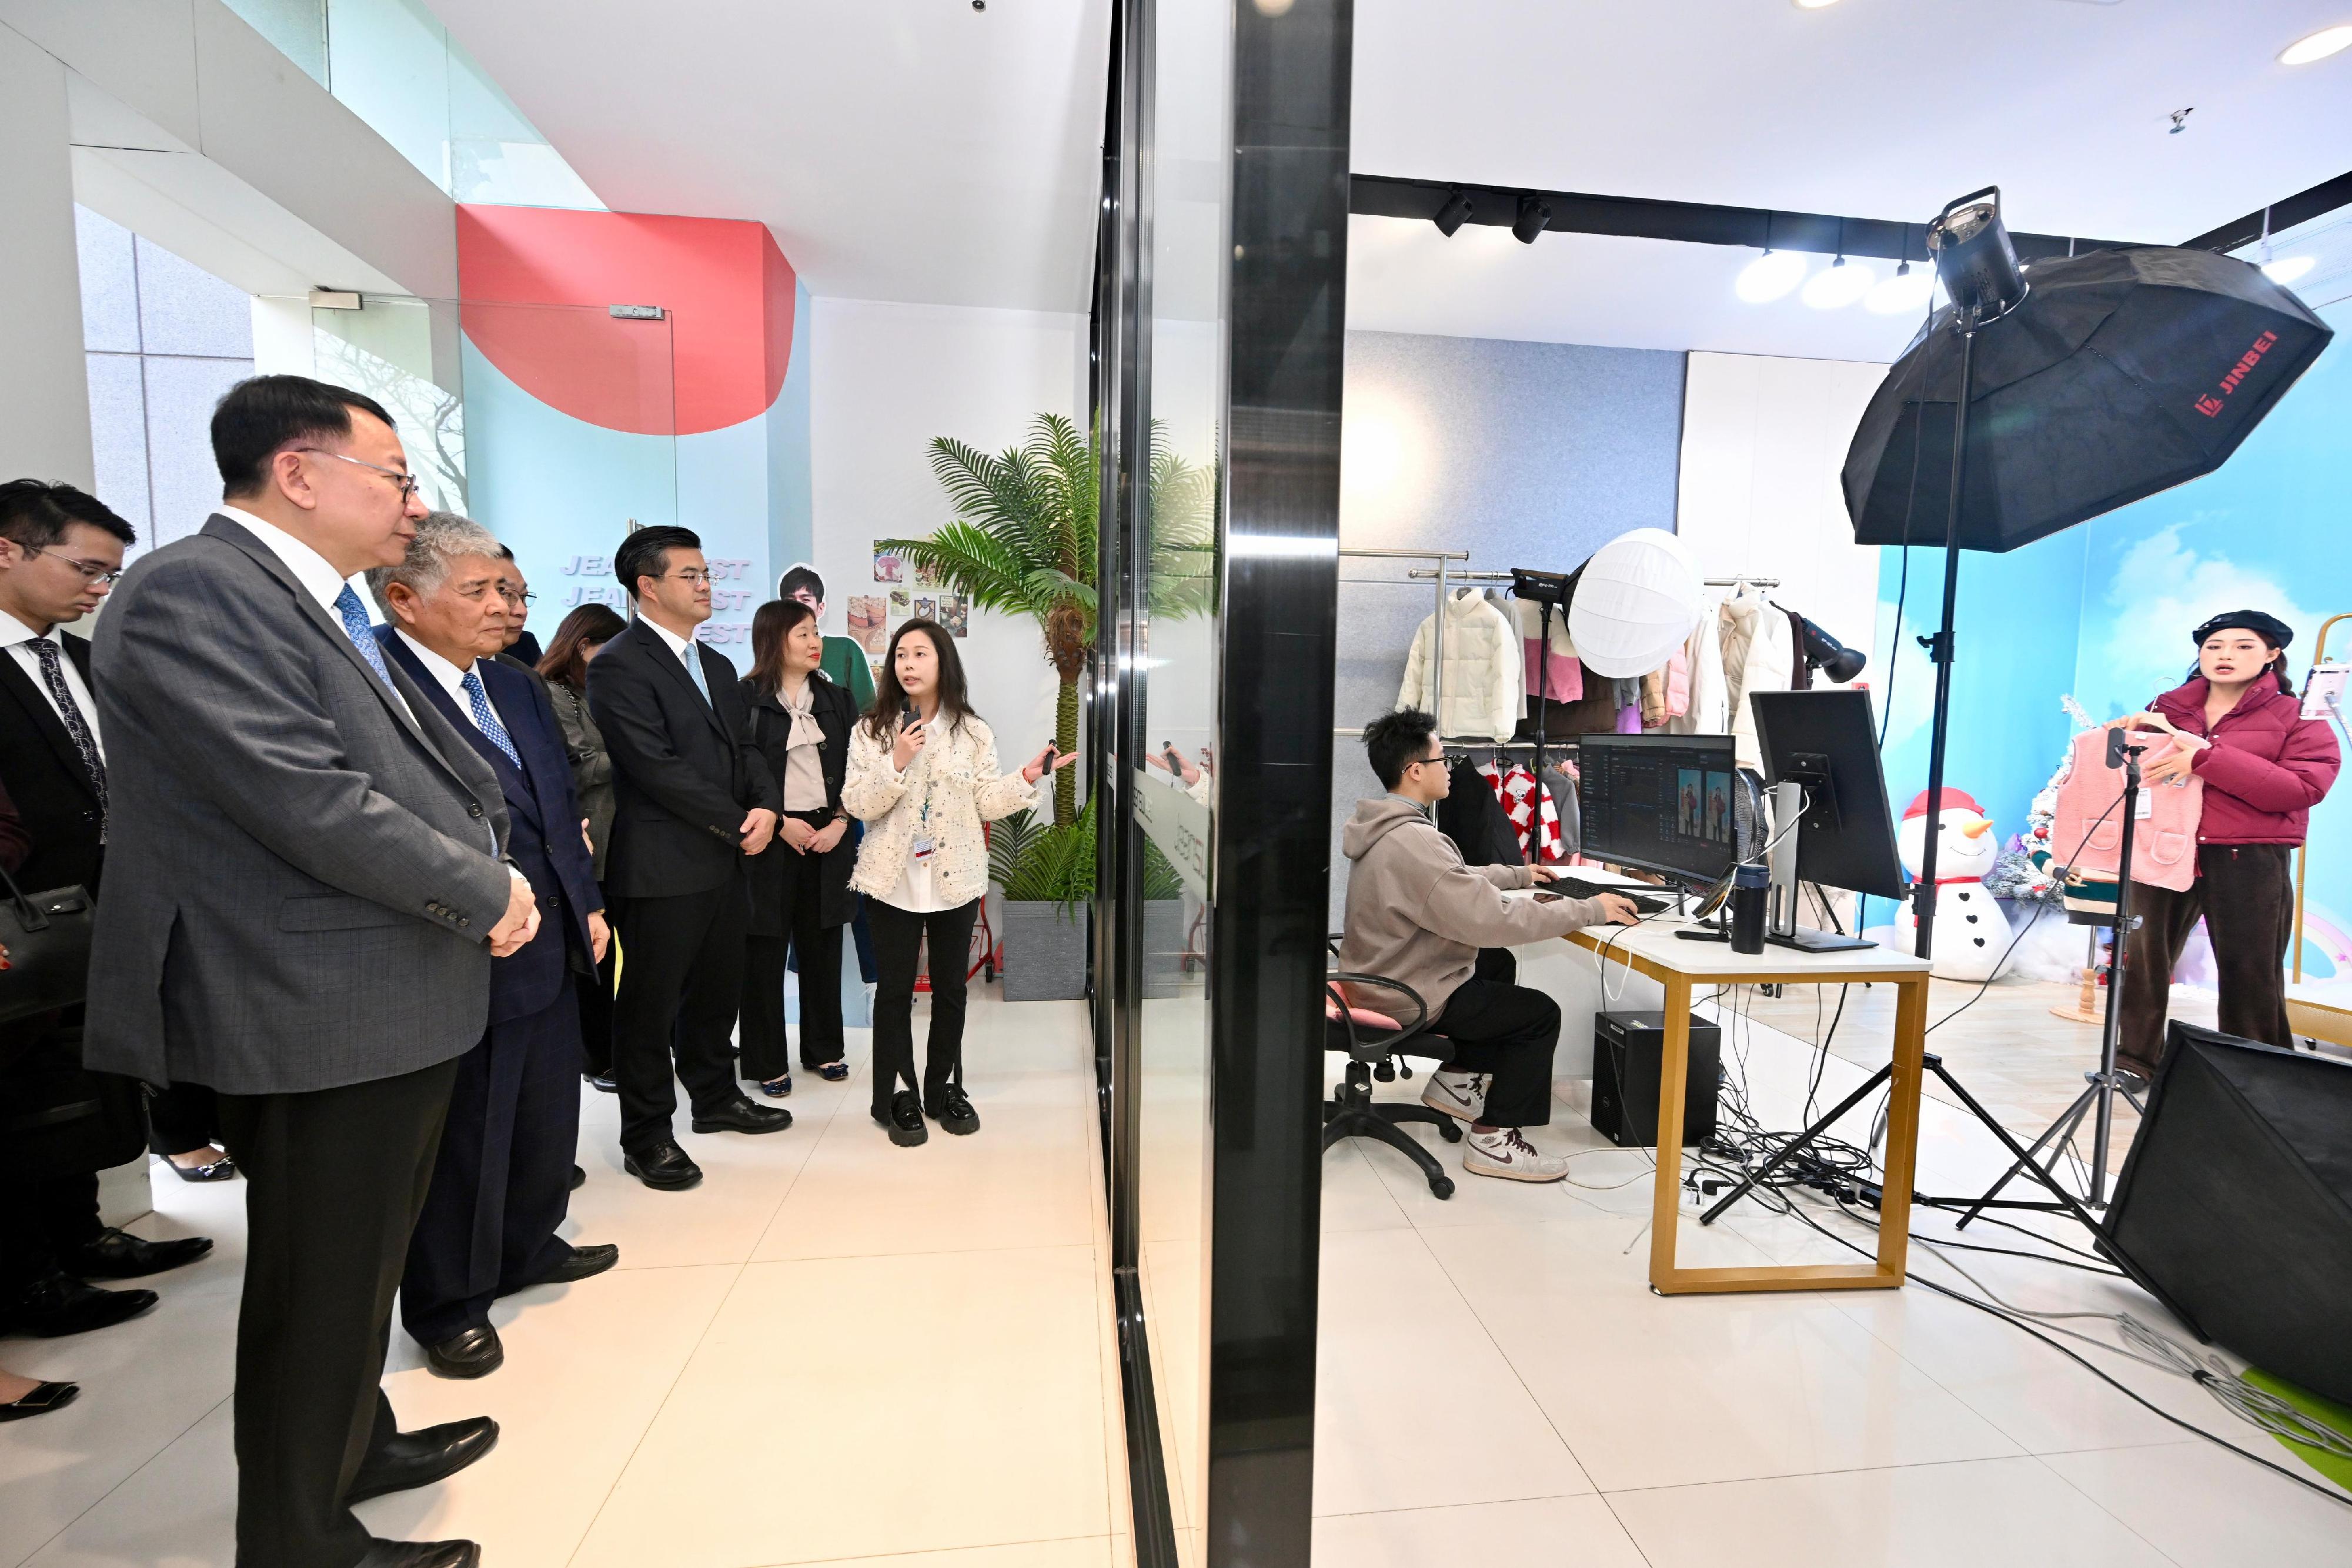 The Chief Secretary for Administration, Mr Chan Kwok-ki, continued his visit to Mainland cities of the Guangdong-Hong Kong-Macao Greater Bay Area in Guangzhou and Huizhou today (January 9). Photo shows Mr Chan (first left) touring a live streaming studio at the Glorious Sun Group in Huizhou.